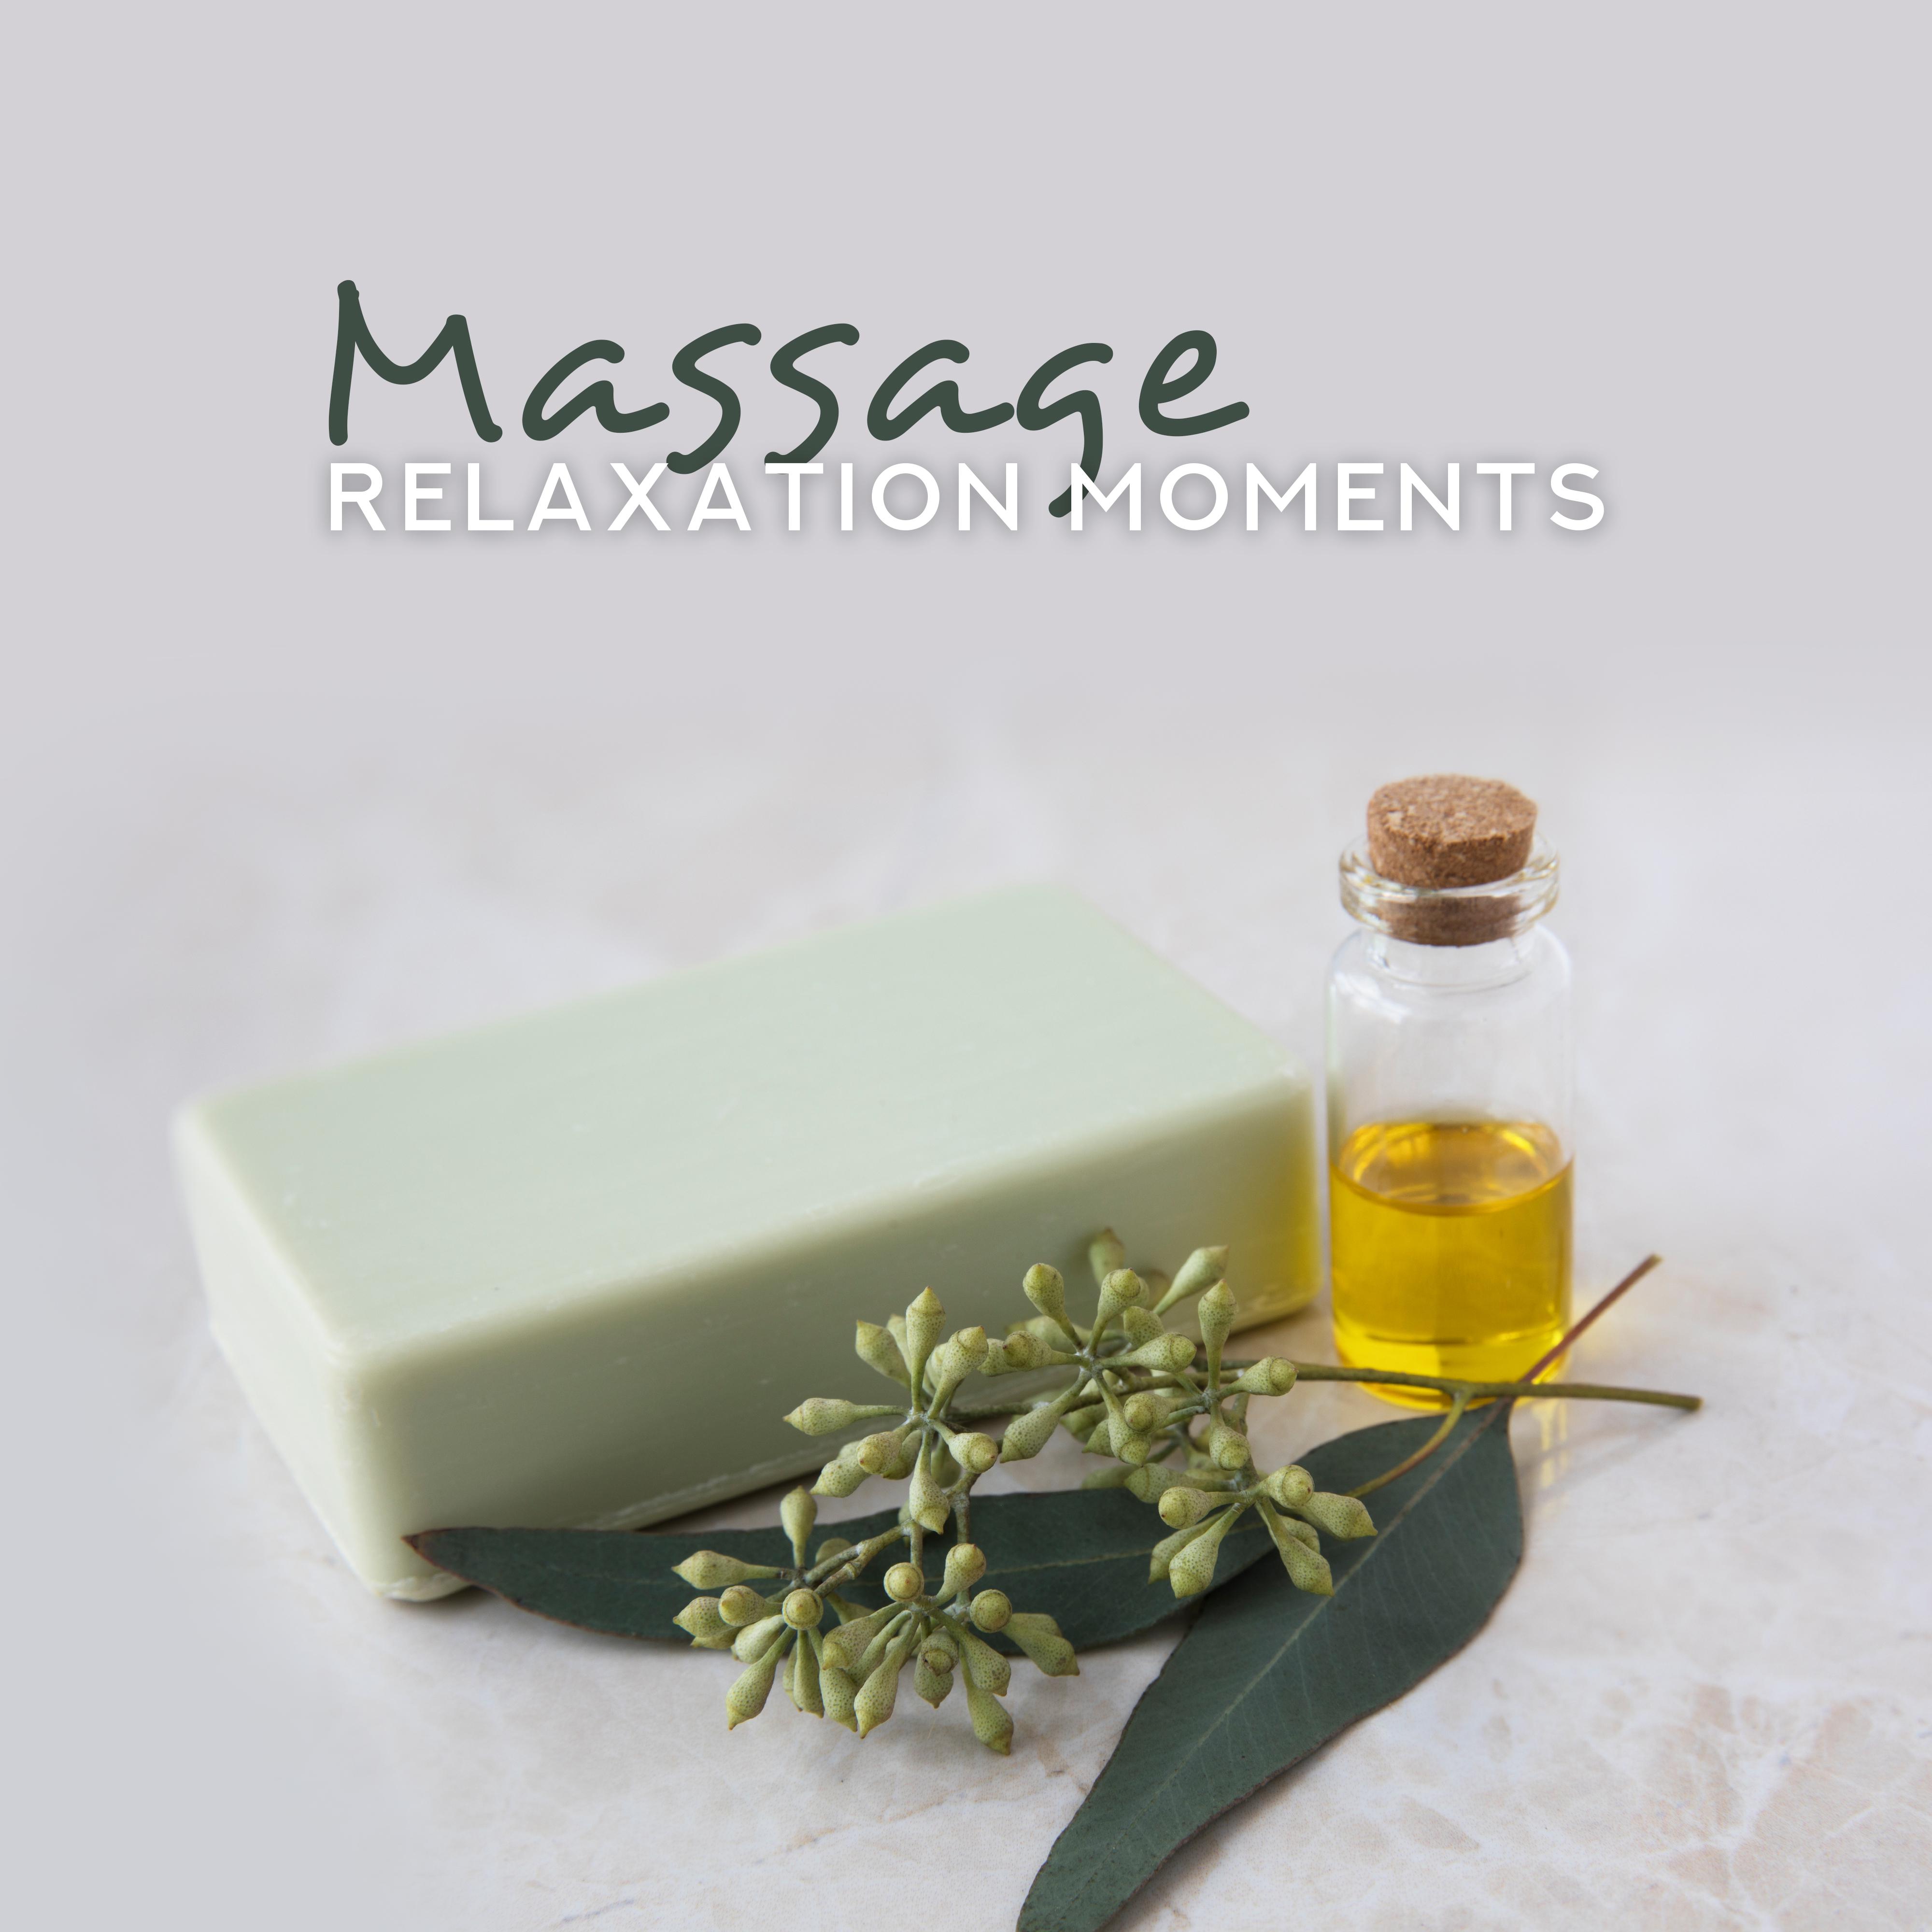 Massage Relaxation Moments: 2019 New Age Music with Nature Sounds Perfect for Spa Salon, Wellness, Hot Baths, Massage Healing & Relaxing Therapy